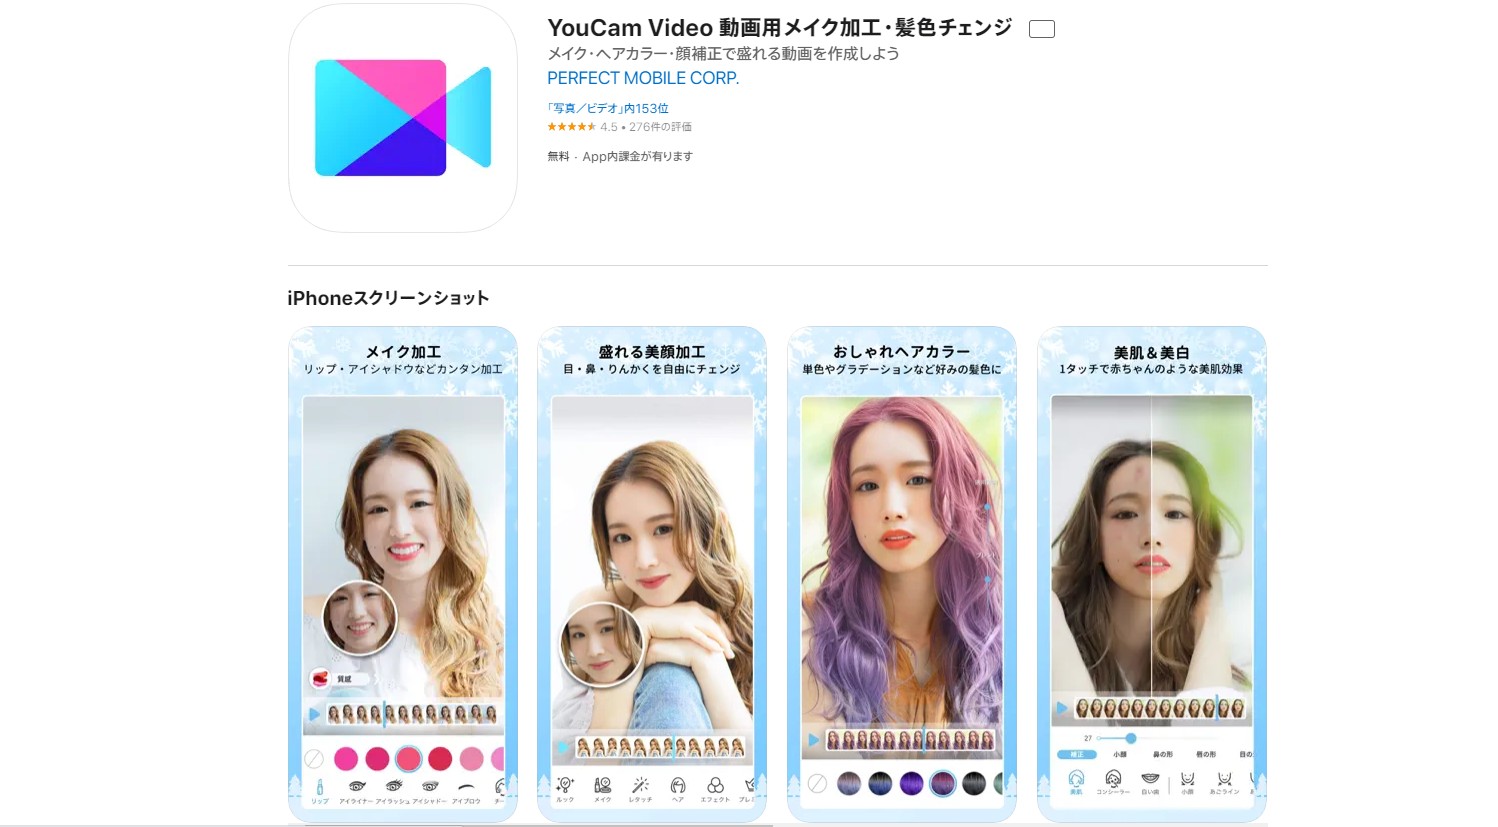 Androidで使える背景ぼかしアプリ-youcamvideo